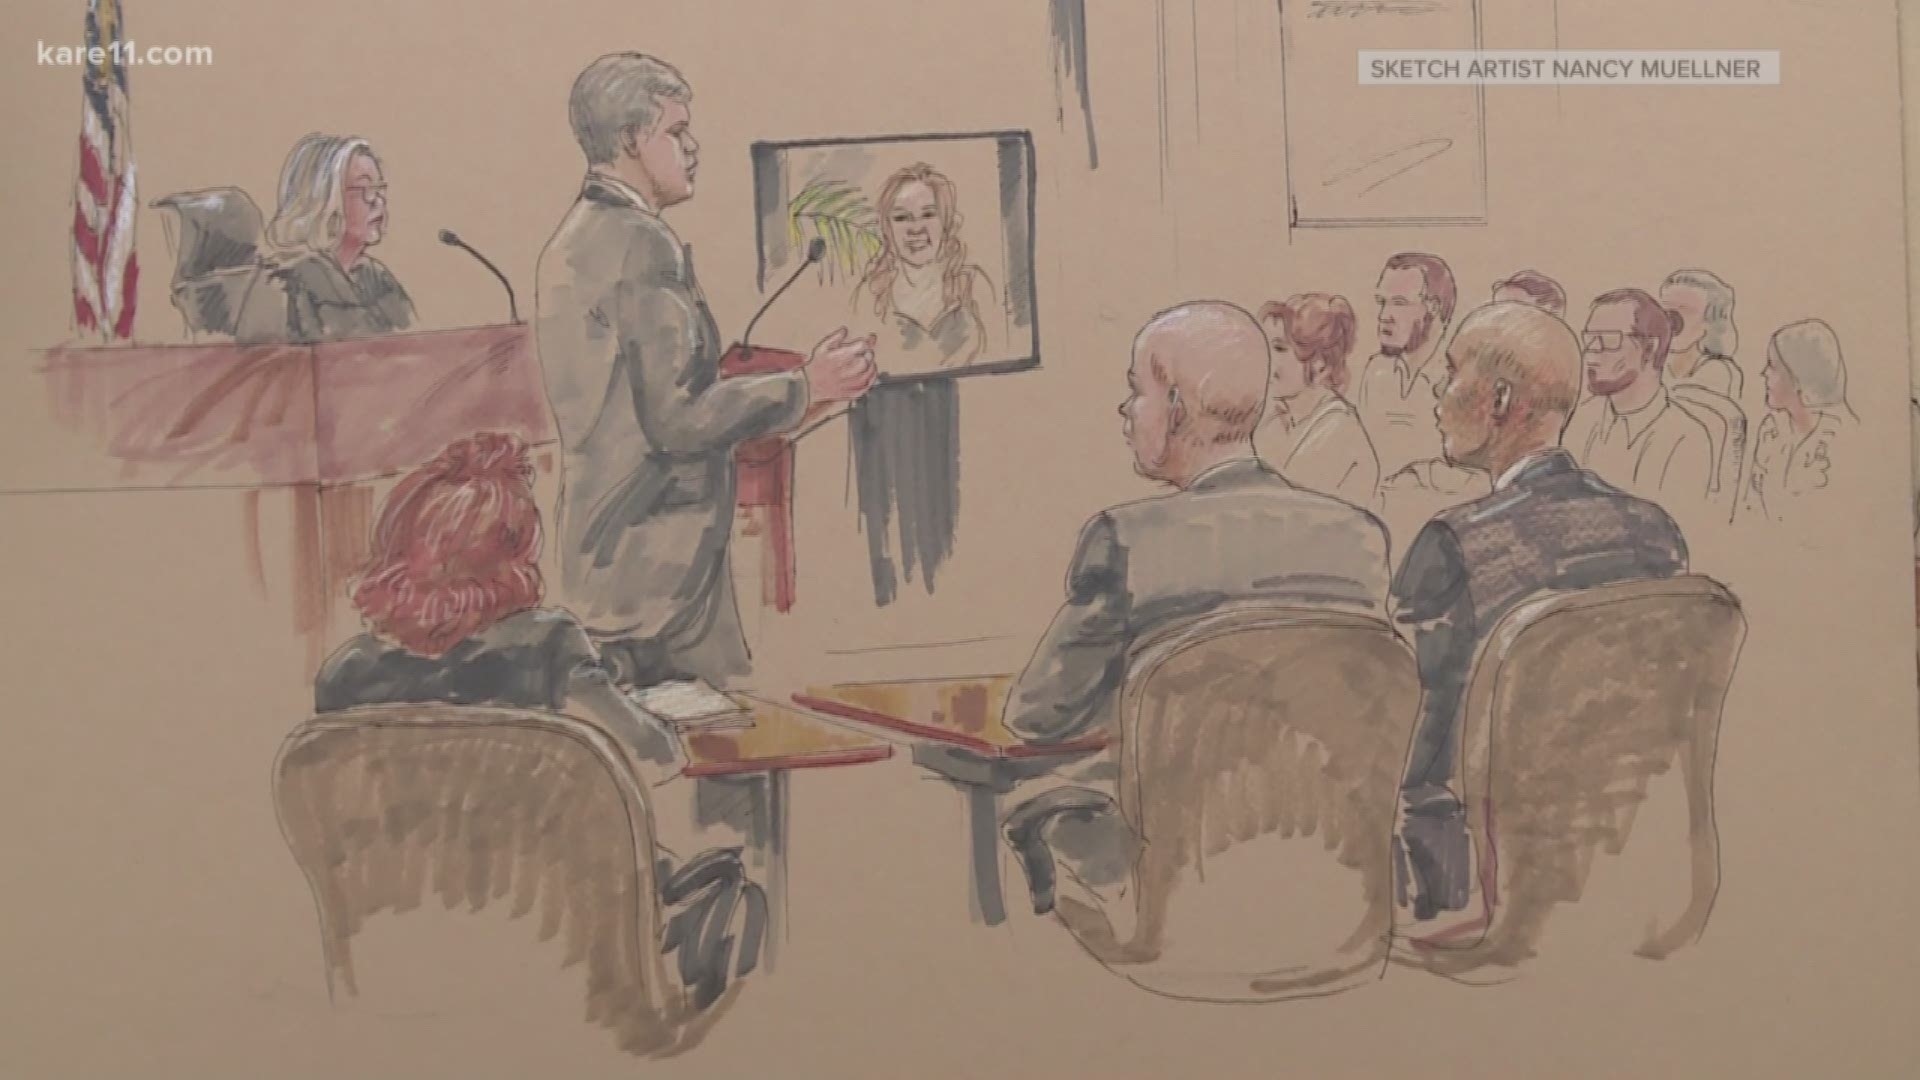 On day two of testimony, jurors heard audio of Justine Ruszczyk calling 911, and saw the crime scene photos.